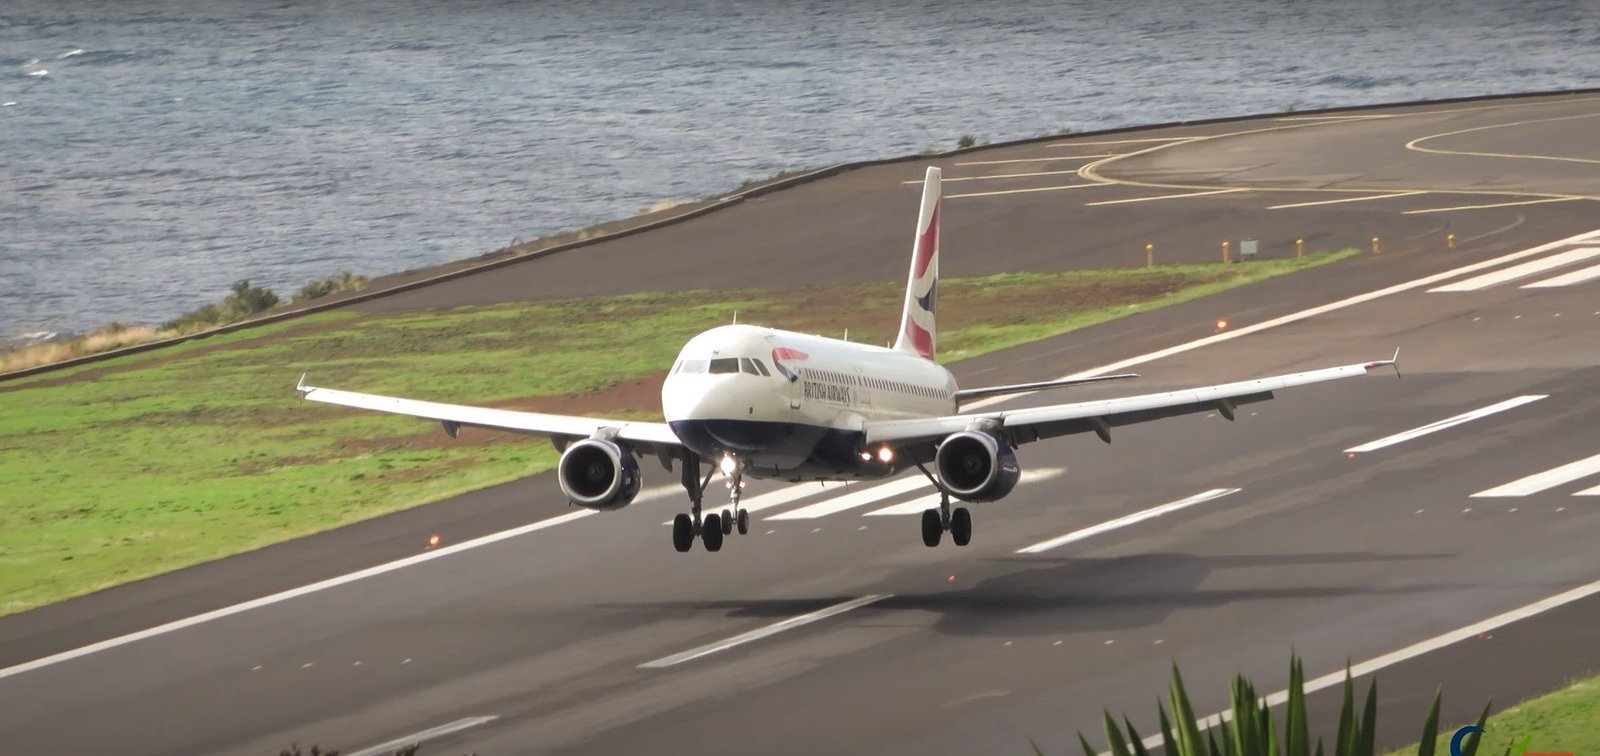 Bounce and almost Tail Strike British Airways A320 at Madeira Airport